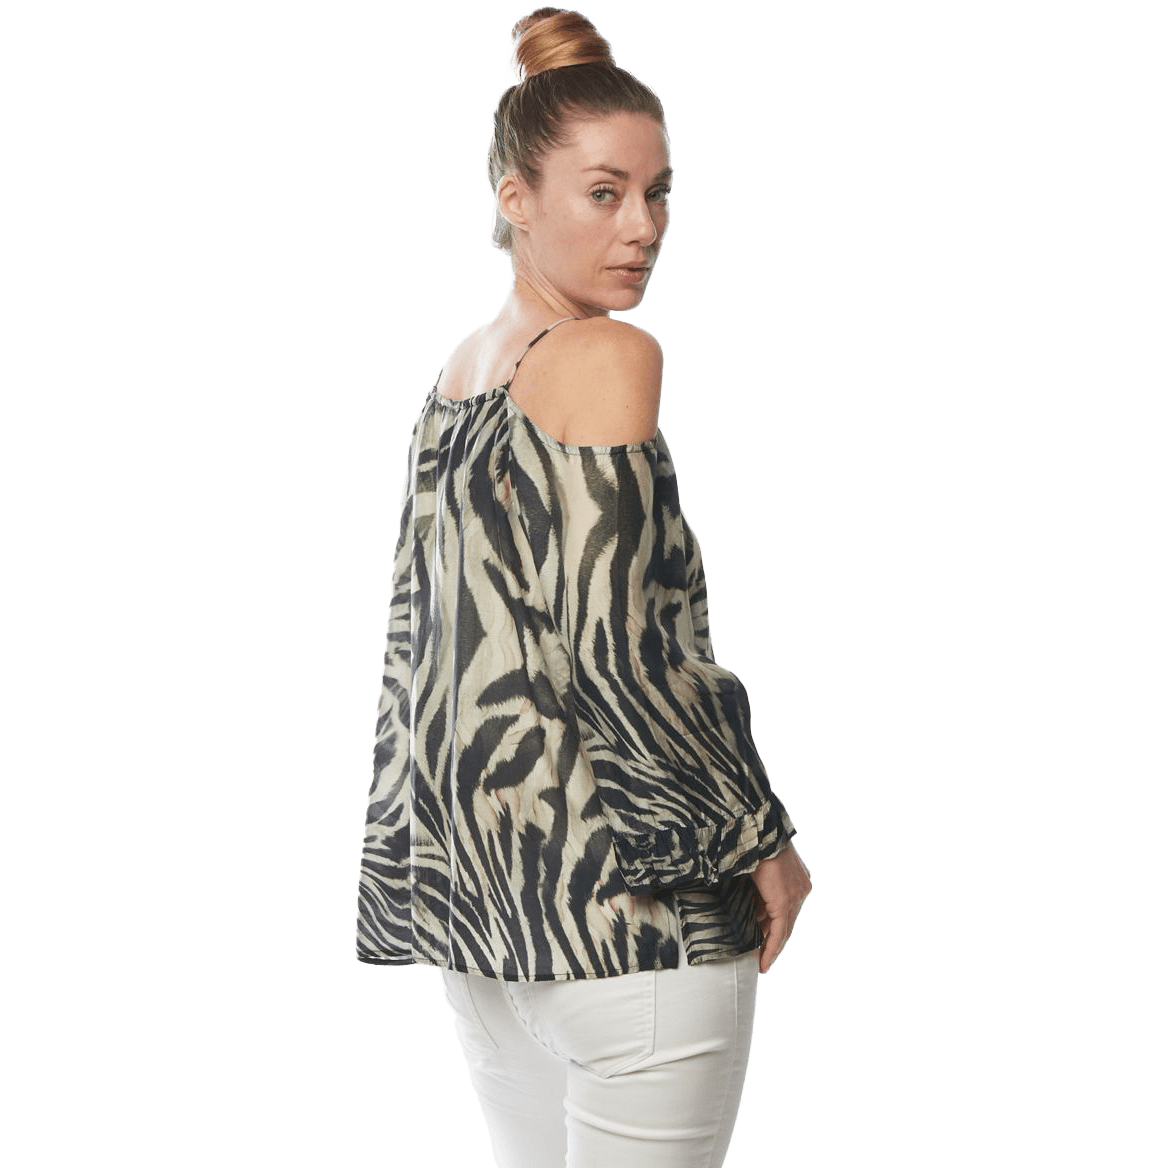 Claire Powell Design Wild Pull Cord Top- side